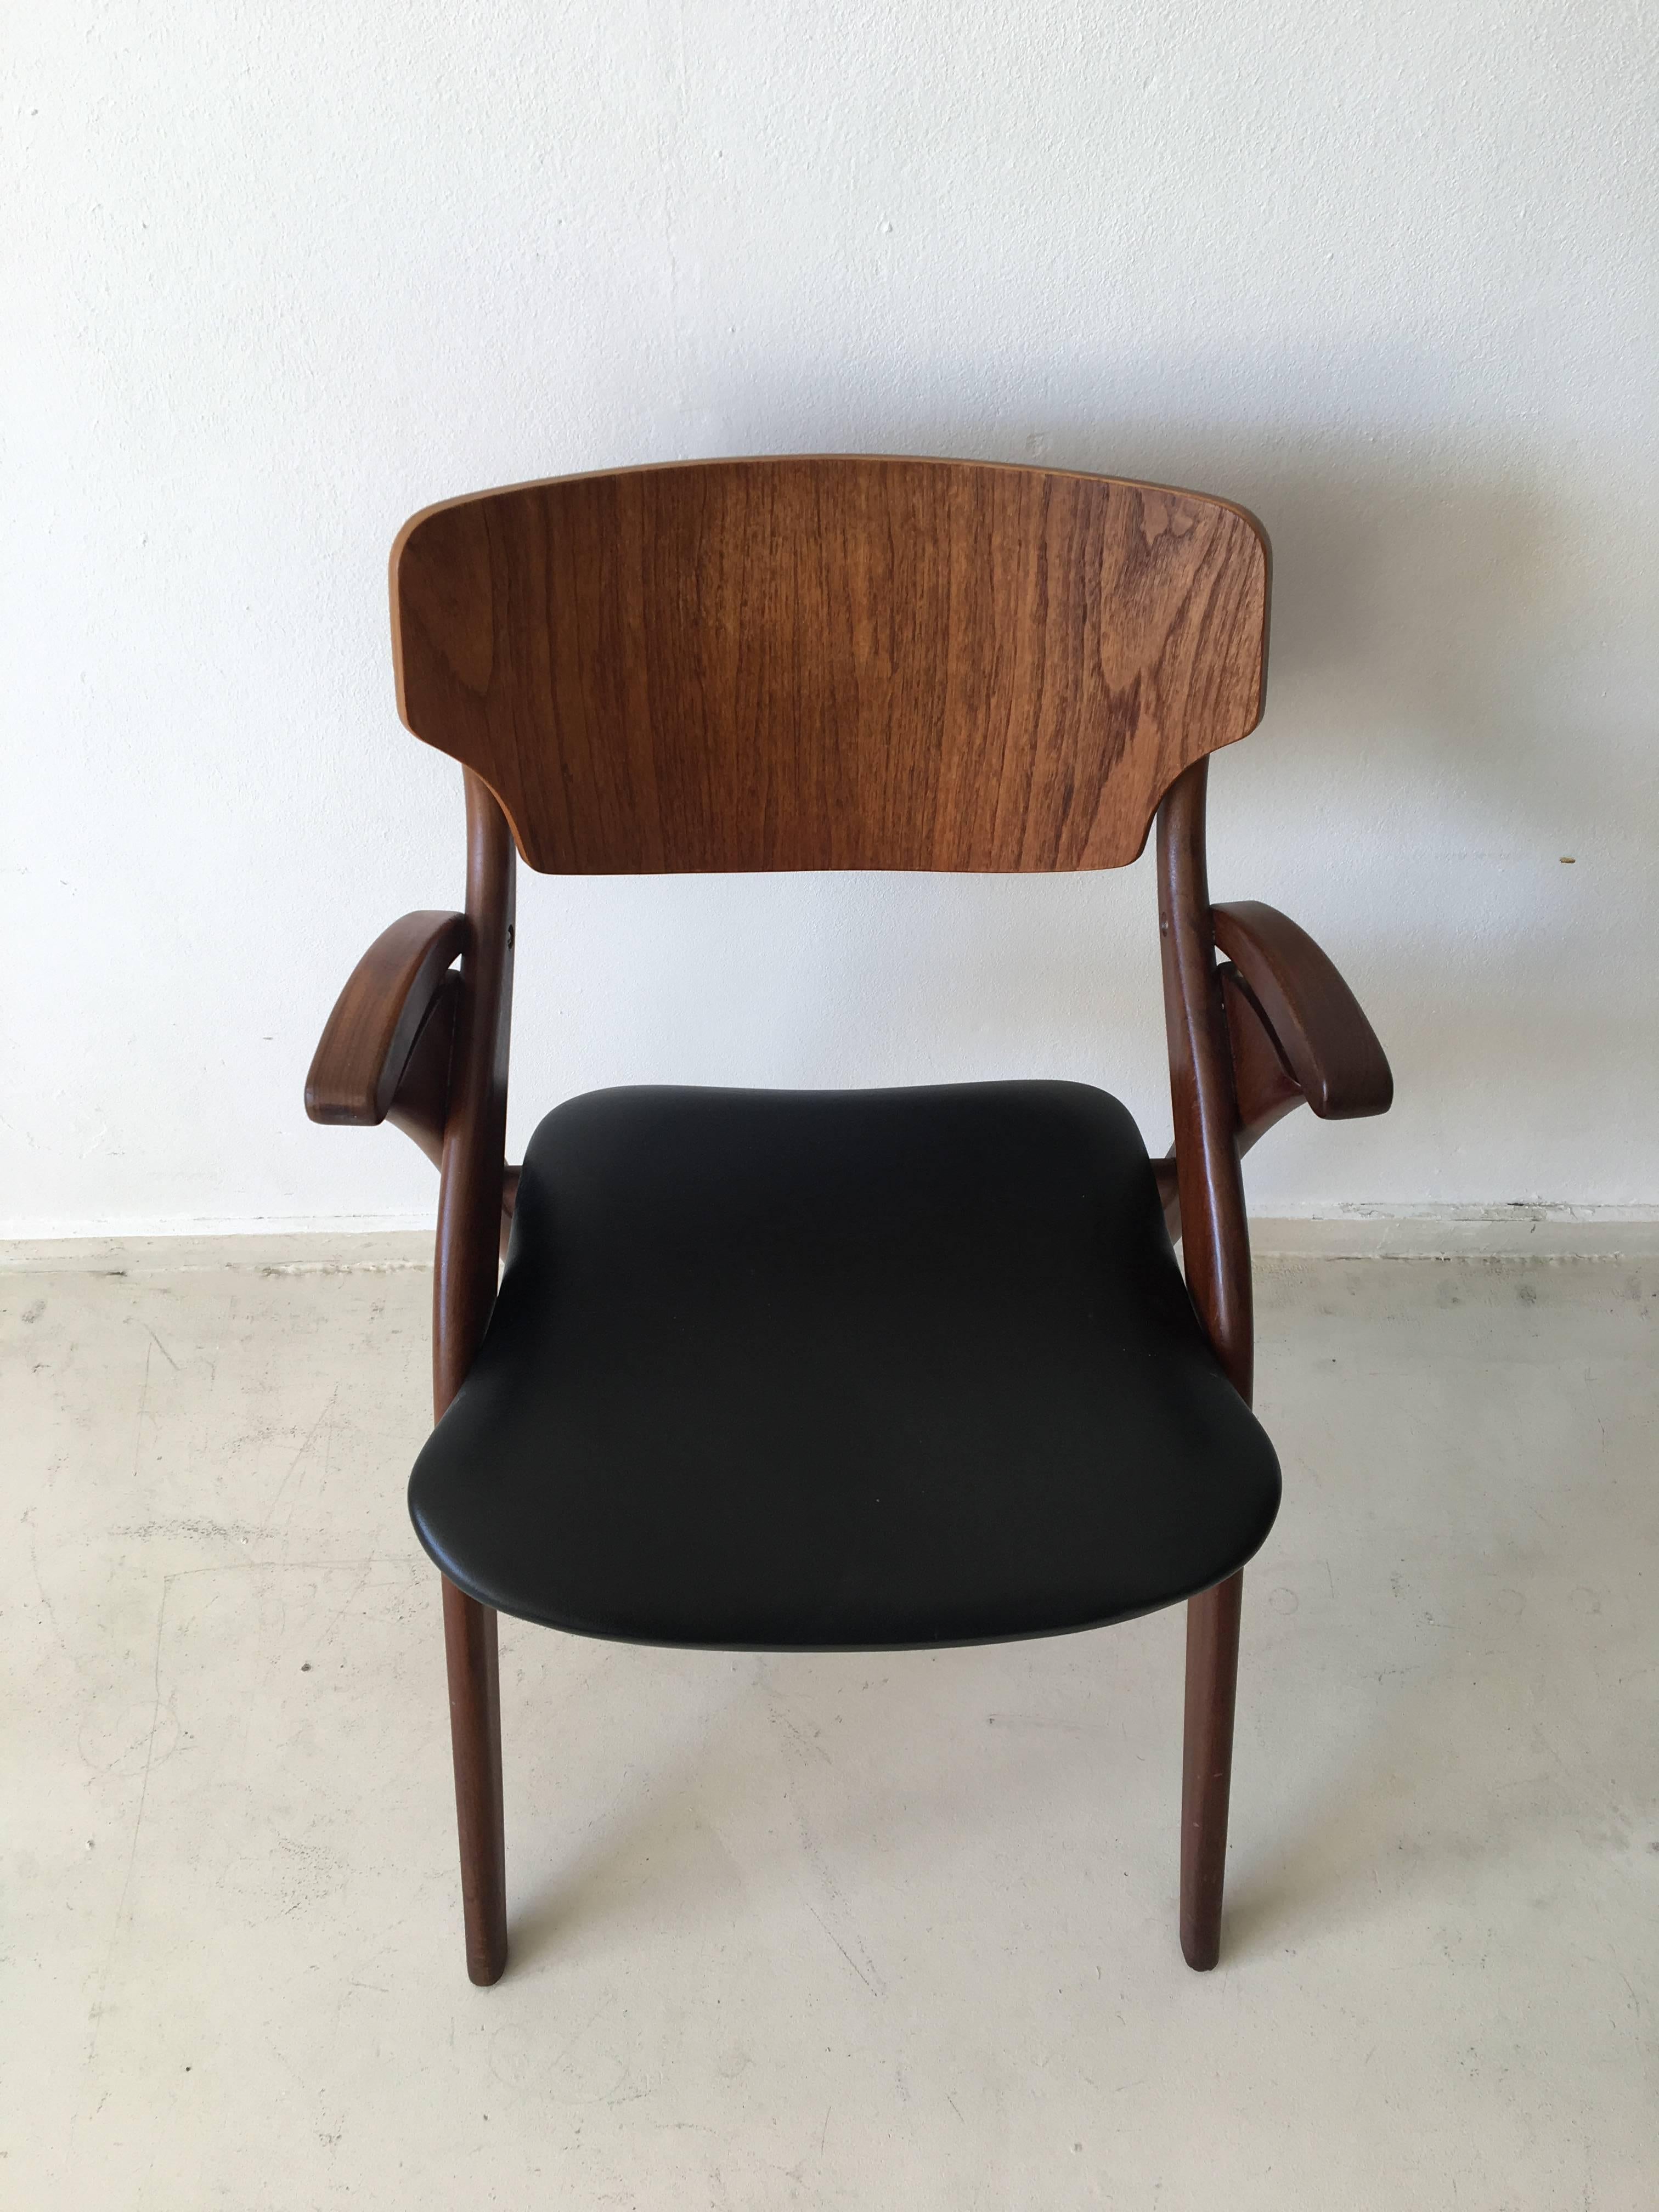 This beautiful Danish design comes with a sculptural frame in teak. At both sides, there are pieces of faux leather, the same as it's upholstery. This chair is in excellent condition with only minor signs of age and use.